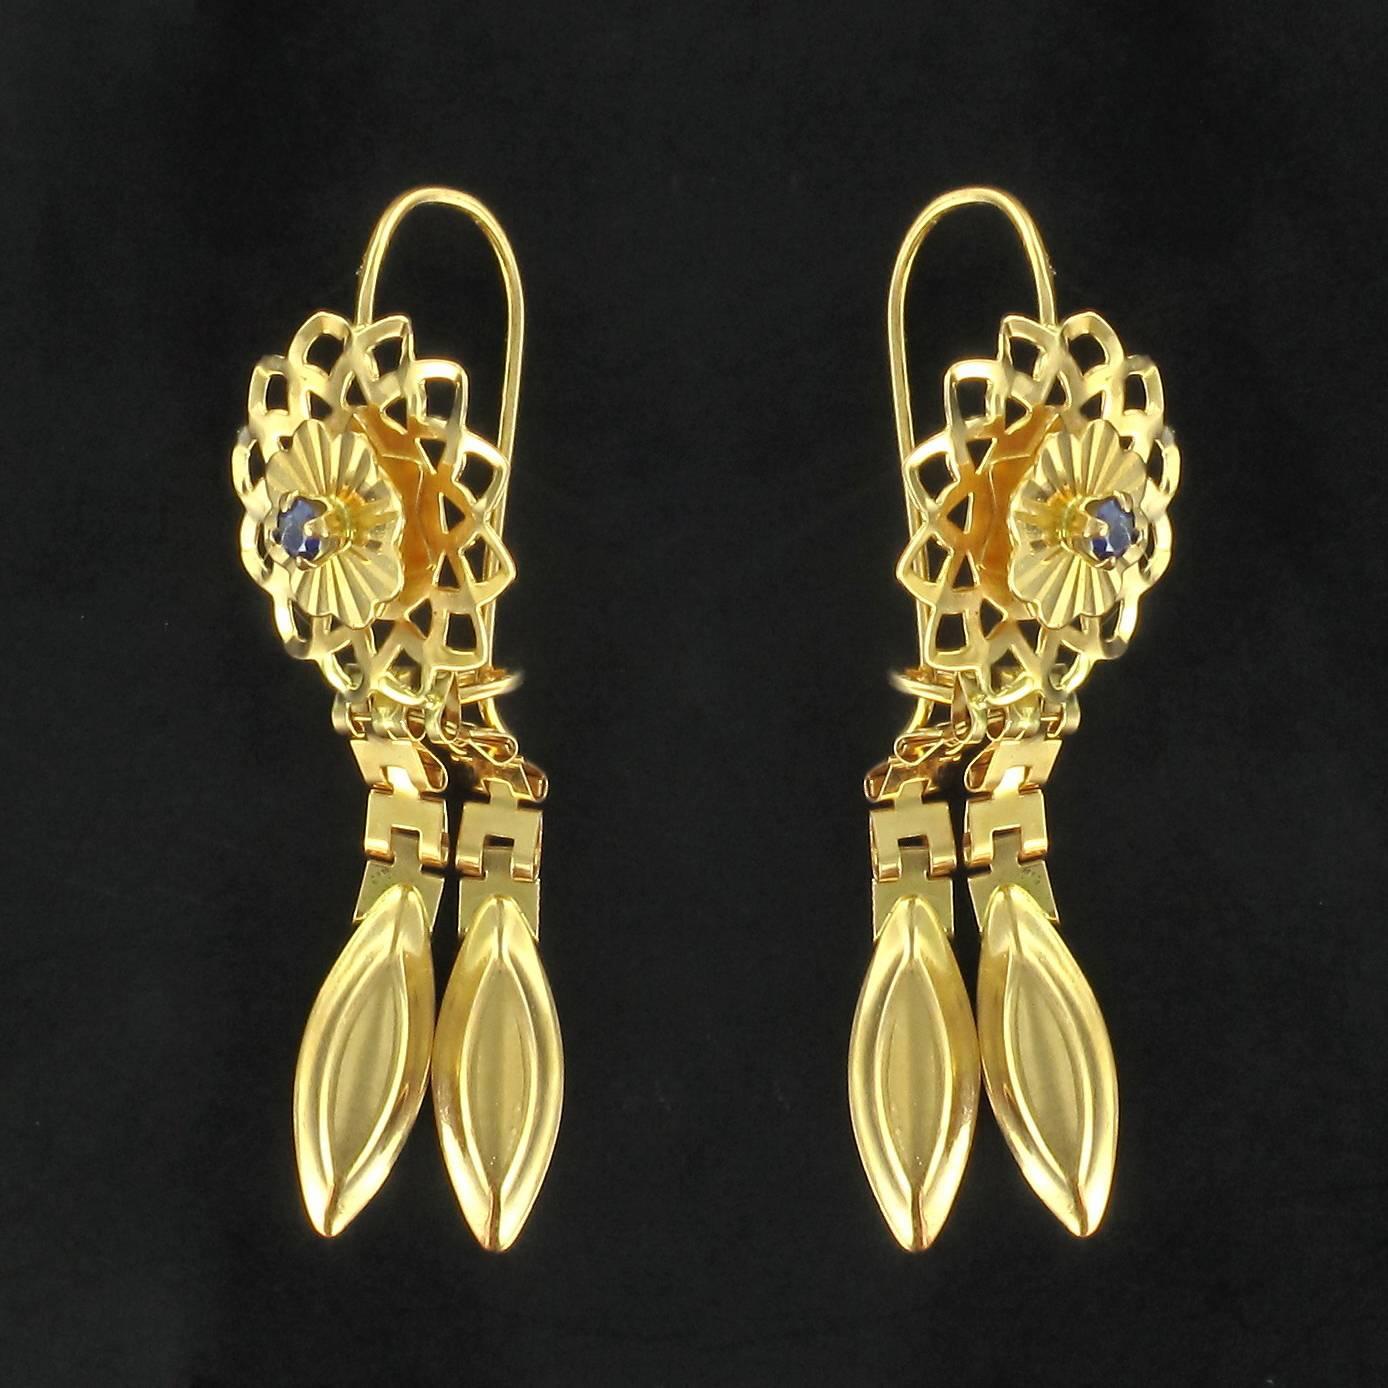 Earrings in 18 carat yellow gold. 

These earrings feature a round flower motif in openwork, chiselled whirls of golden strands from which are asymmetrically suspended 2 chains of flat square openwork links ending each in a faceted golden